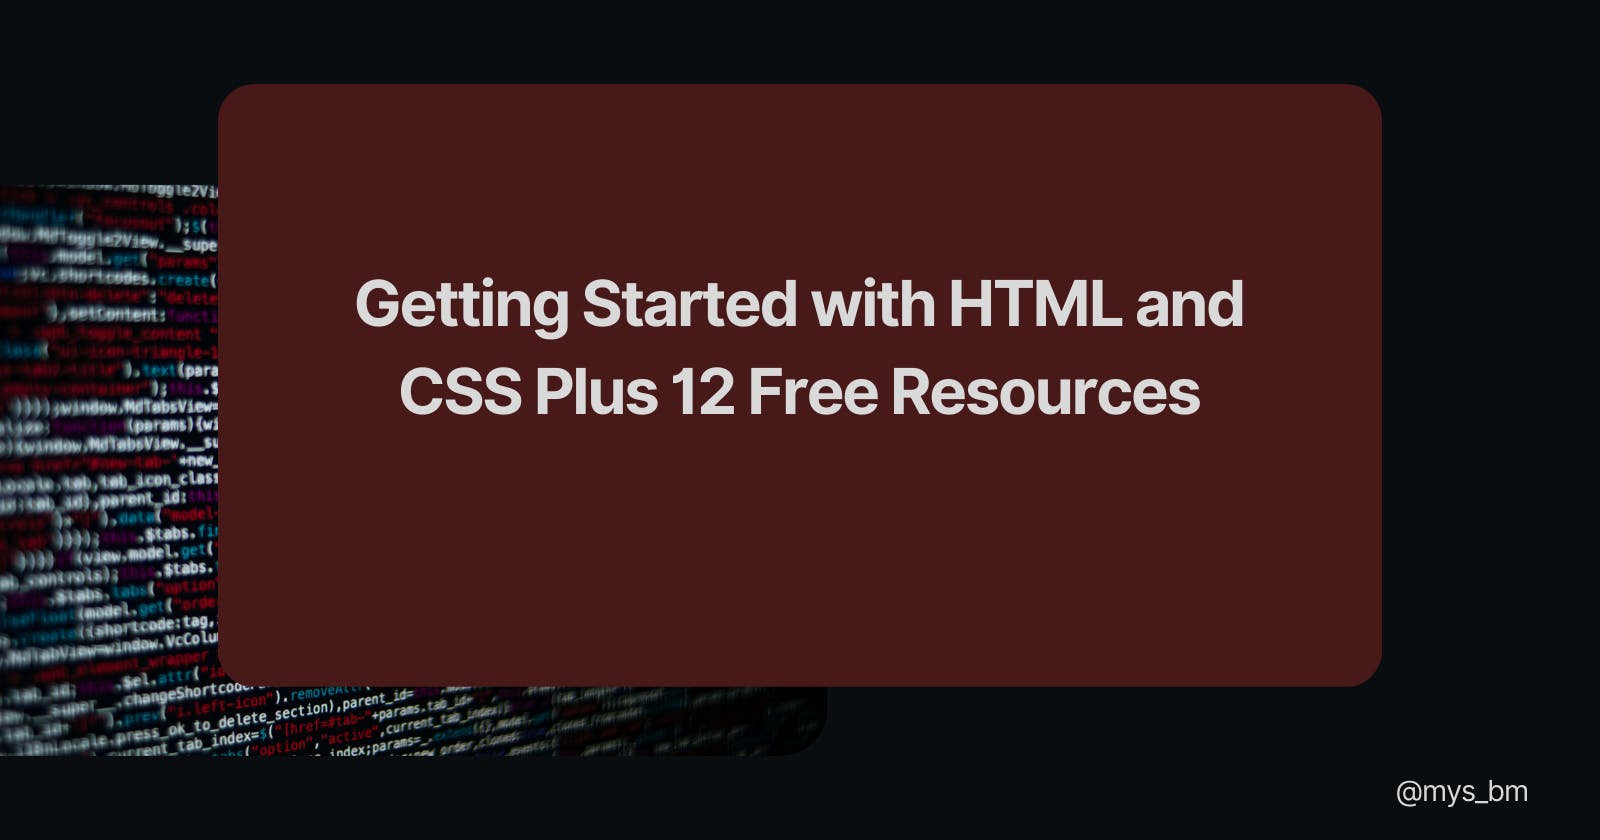 Getting Started with HTML and CSS Plus 12 Free Resources